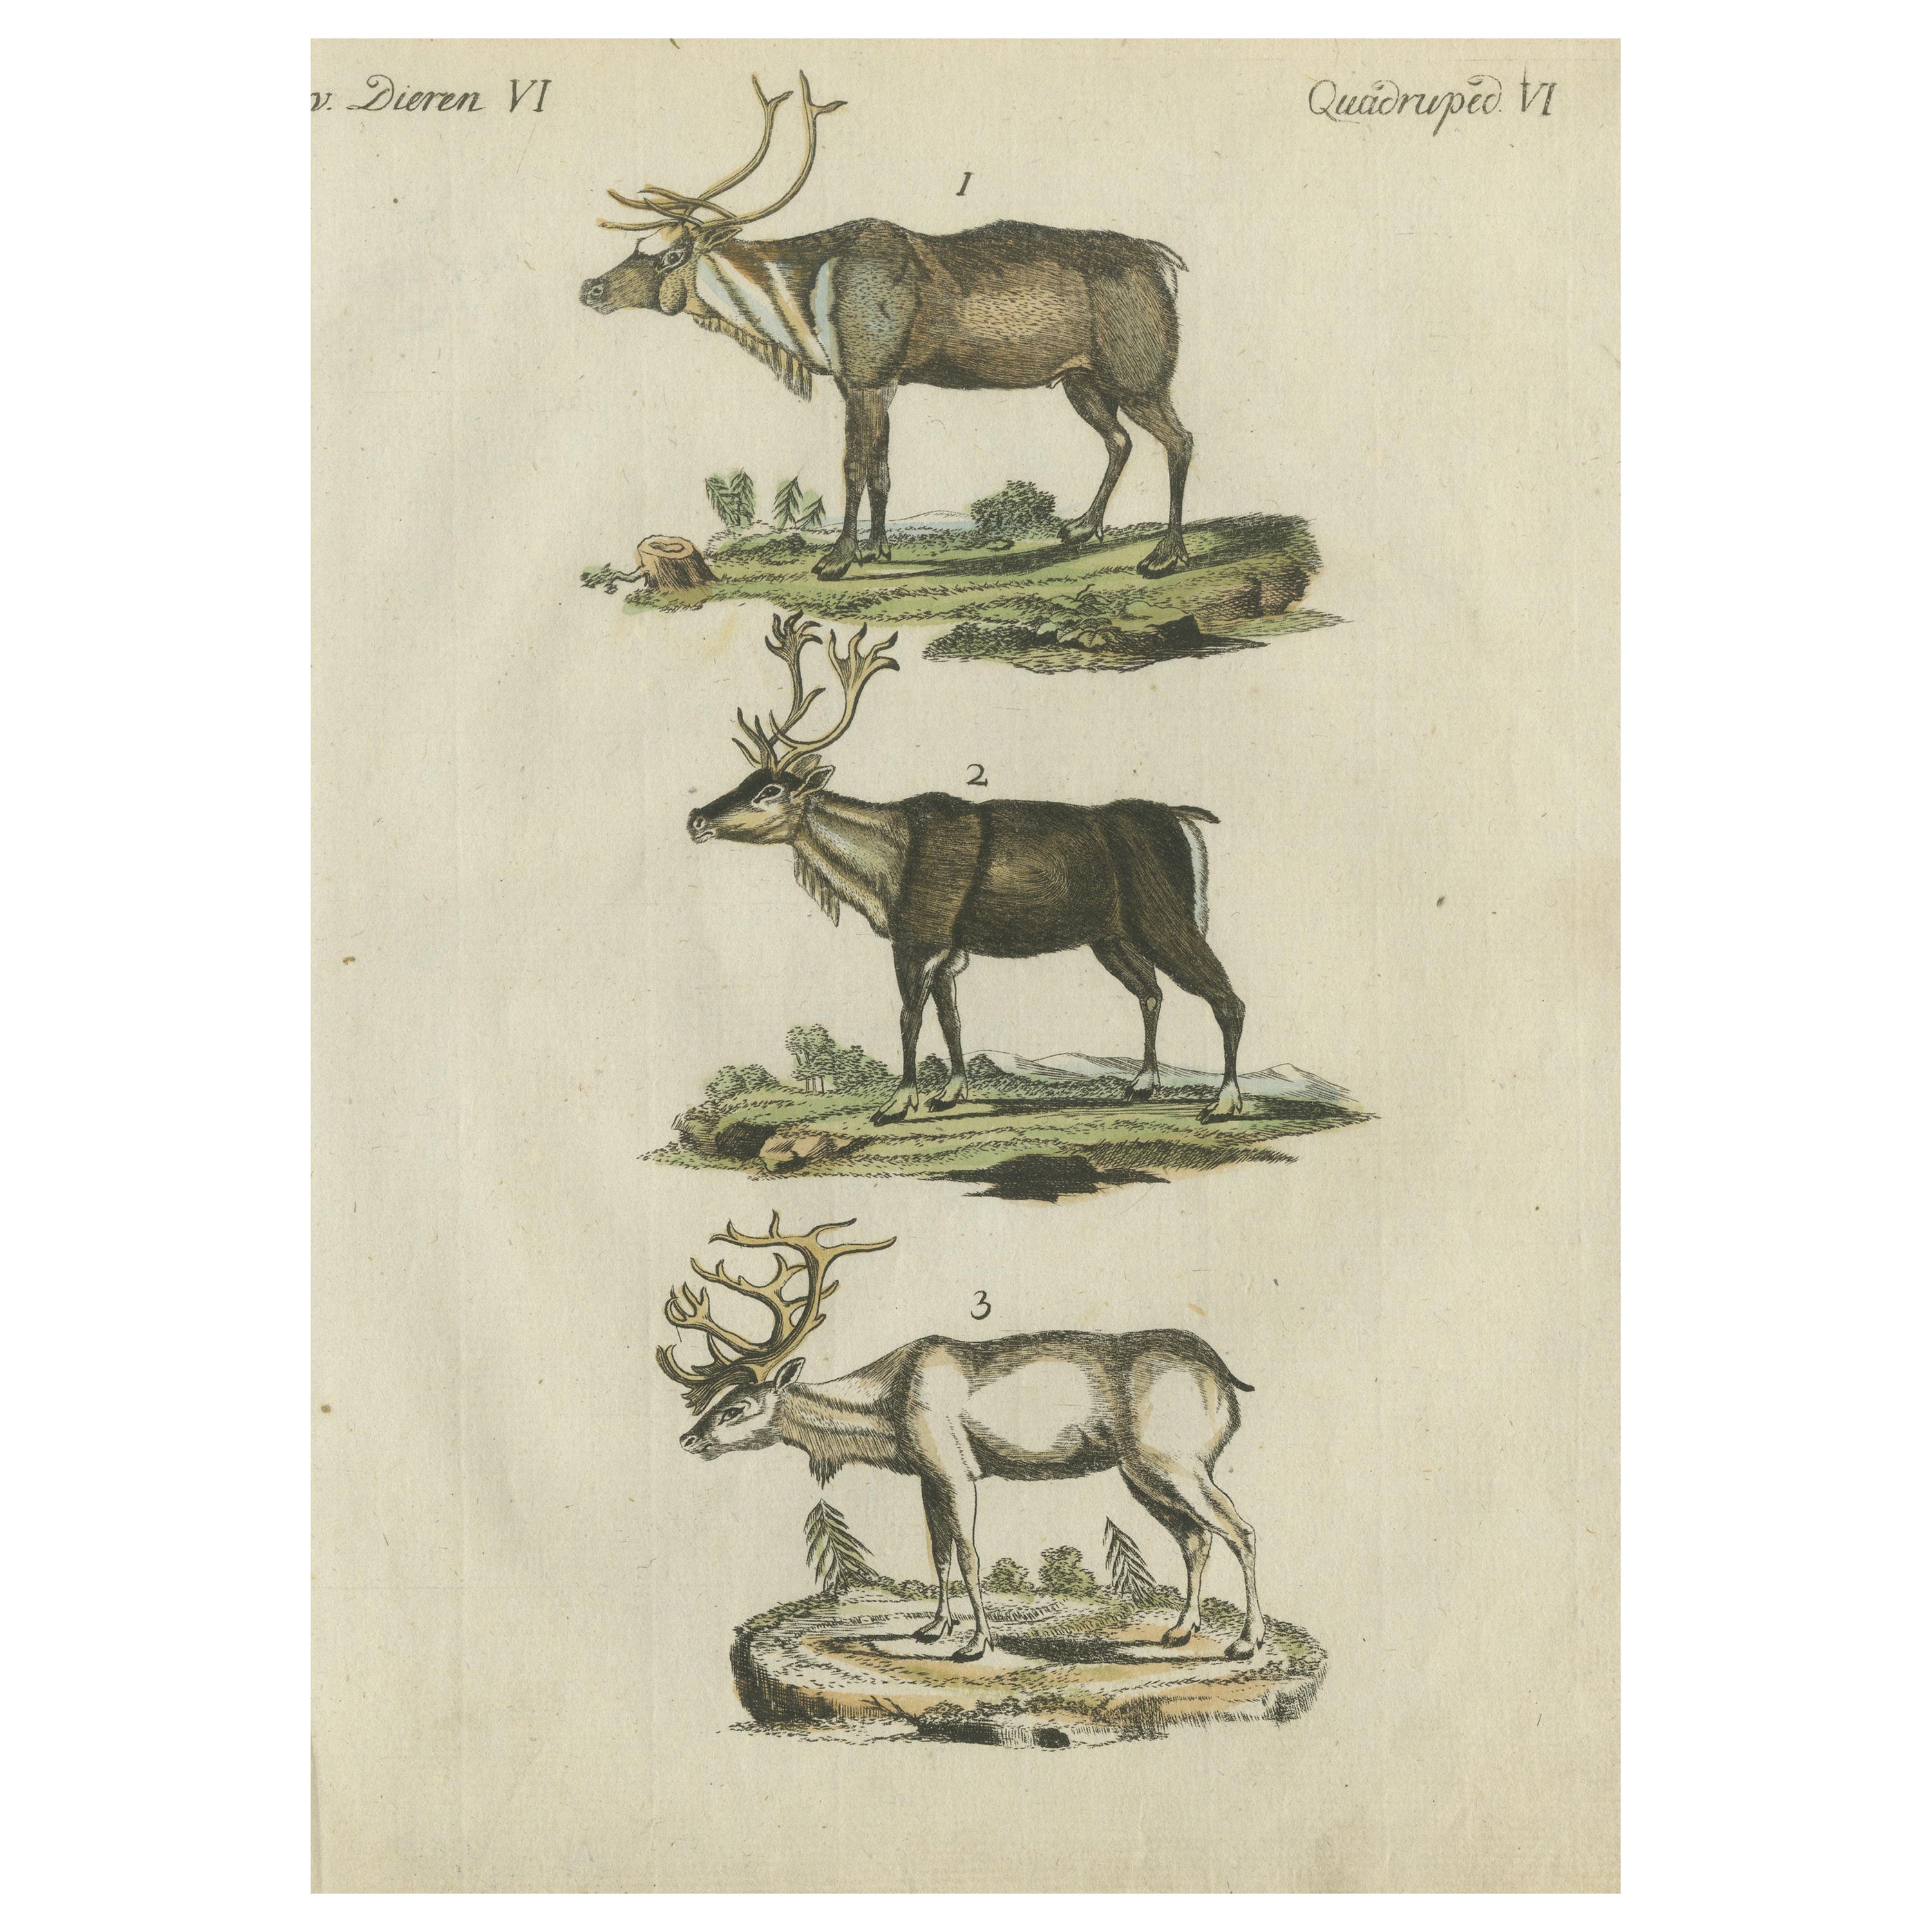 Original Hand Colored Antique Engraving of Reindeer, Published circa 1820